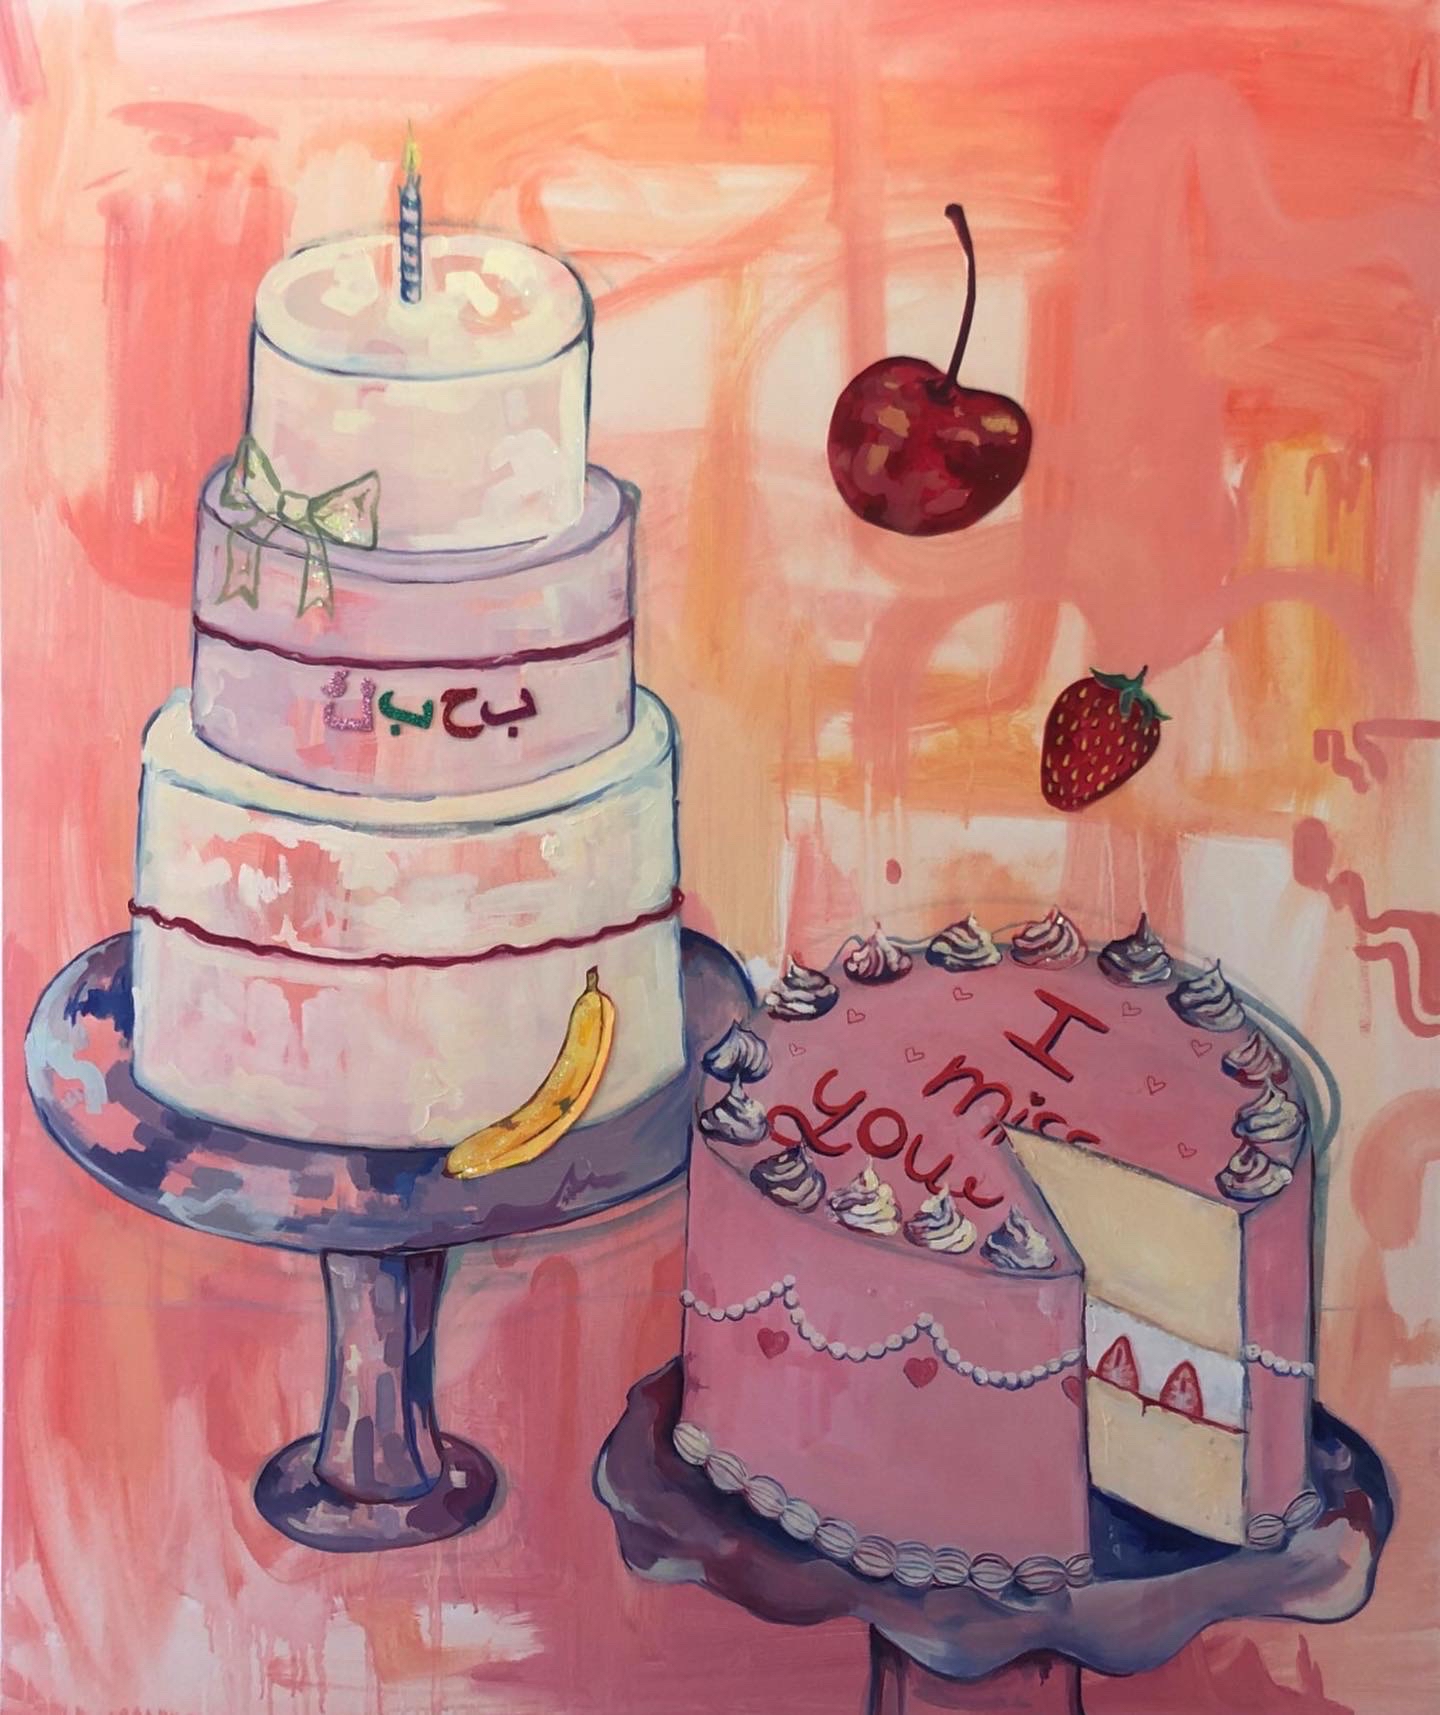 A painting of two pink cakes against an orange background.